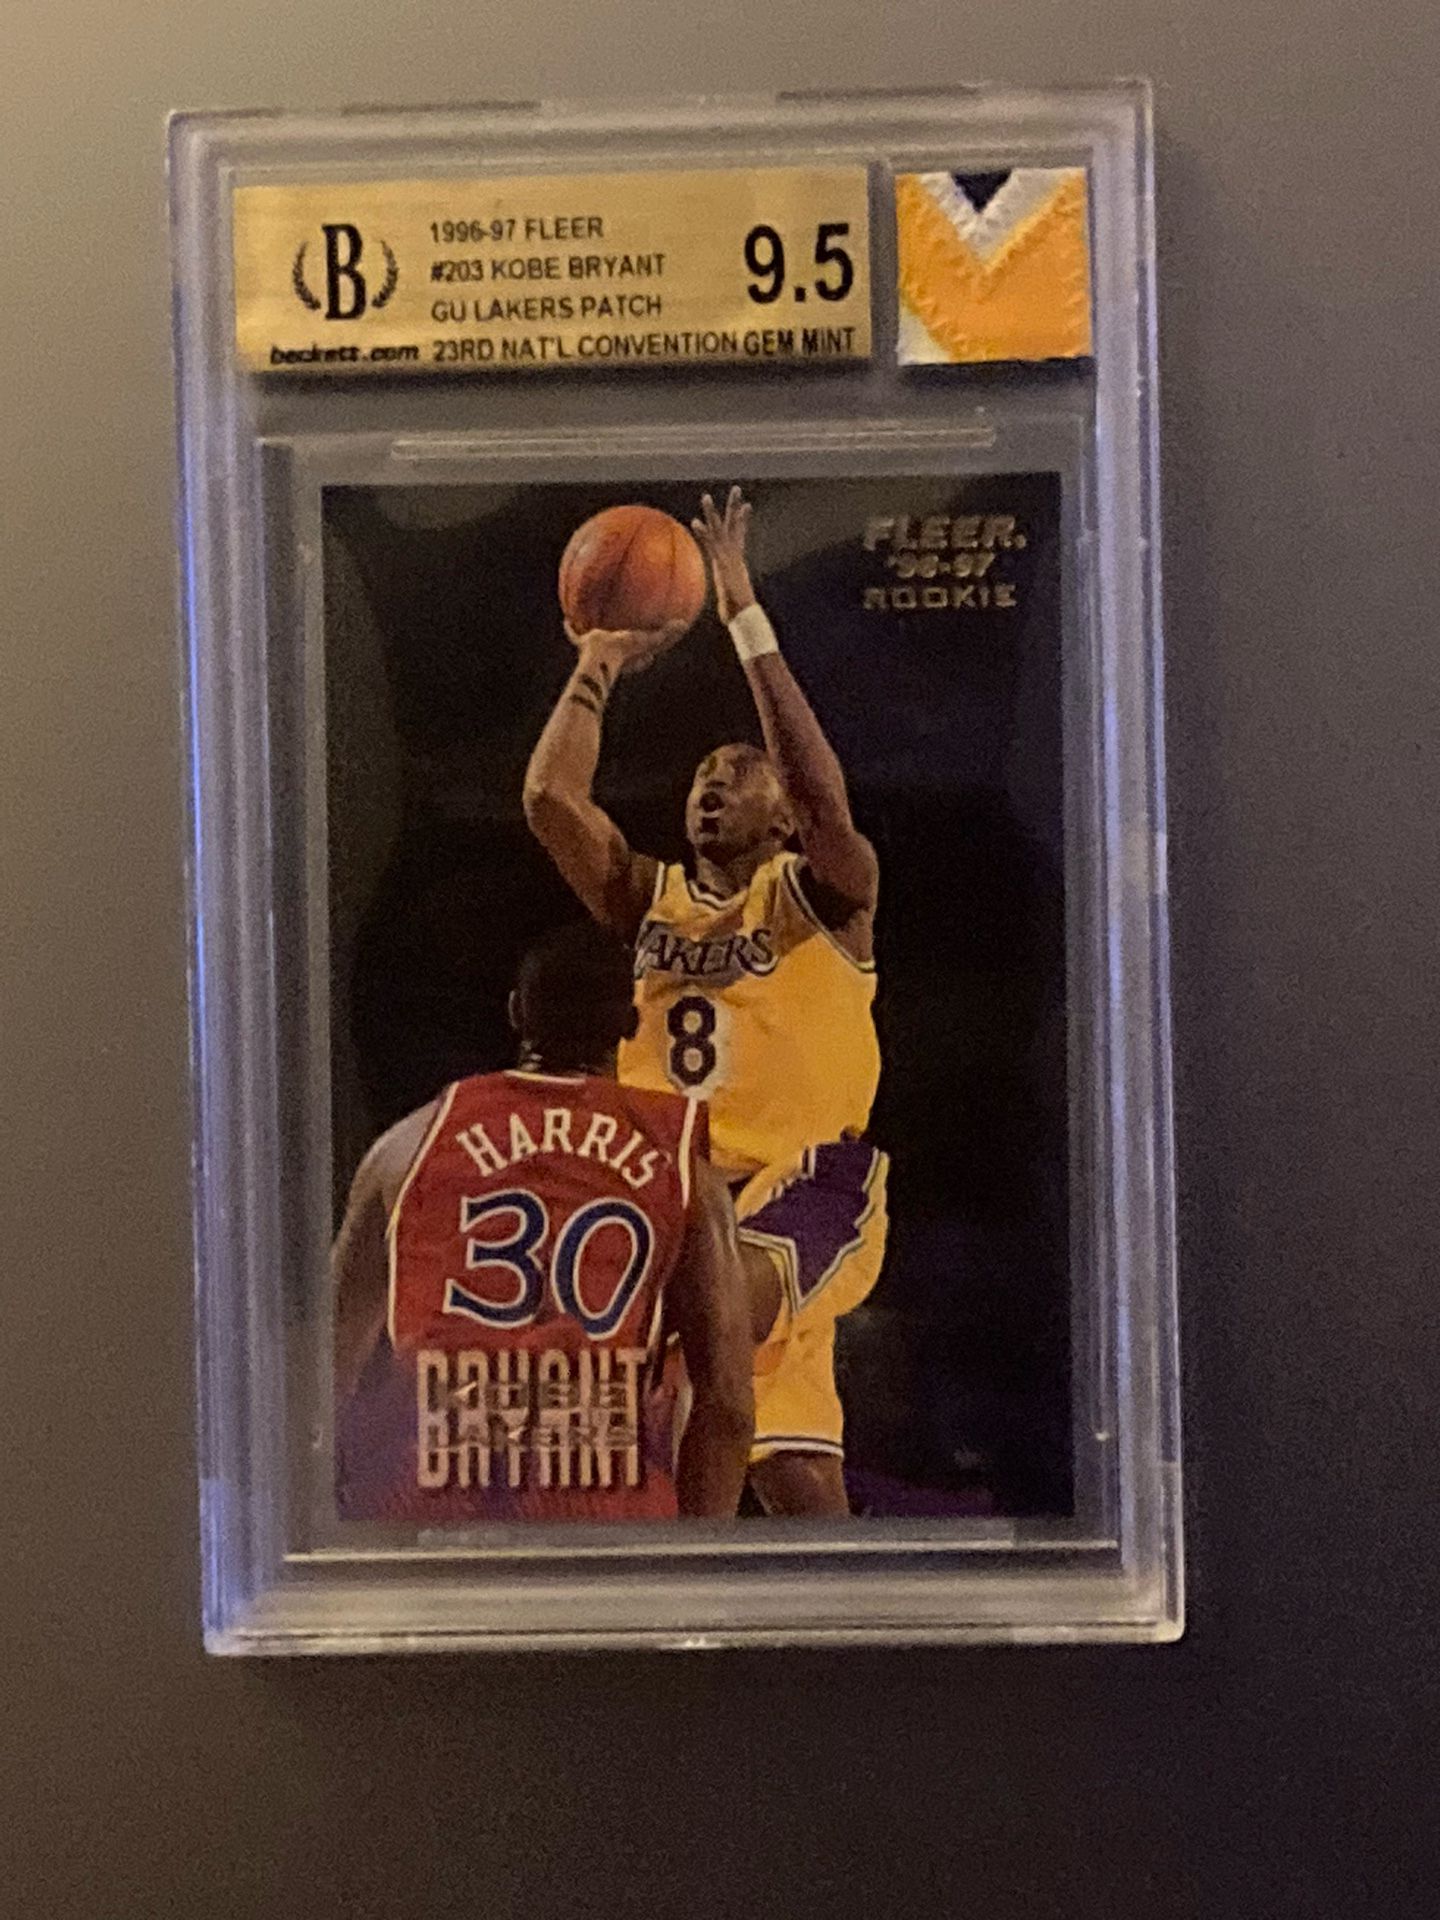 RARE Kobe Bryant 1996-97 Fleer Game Used  Jersey 23rd National Convention rookie BGS 9.5 GEM MINT # 203 rc